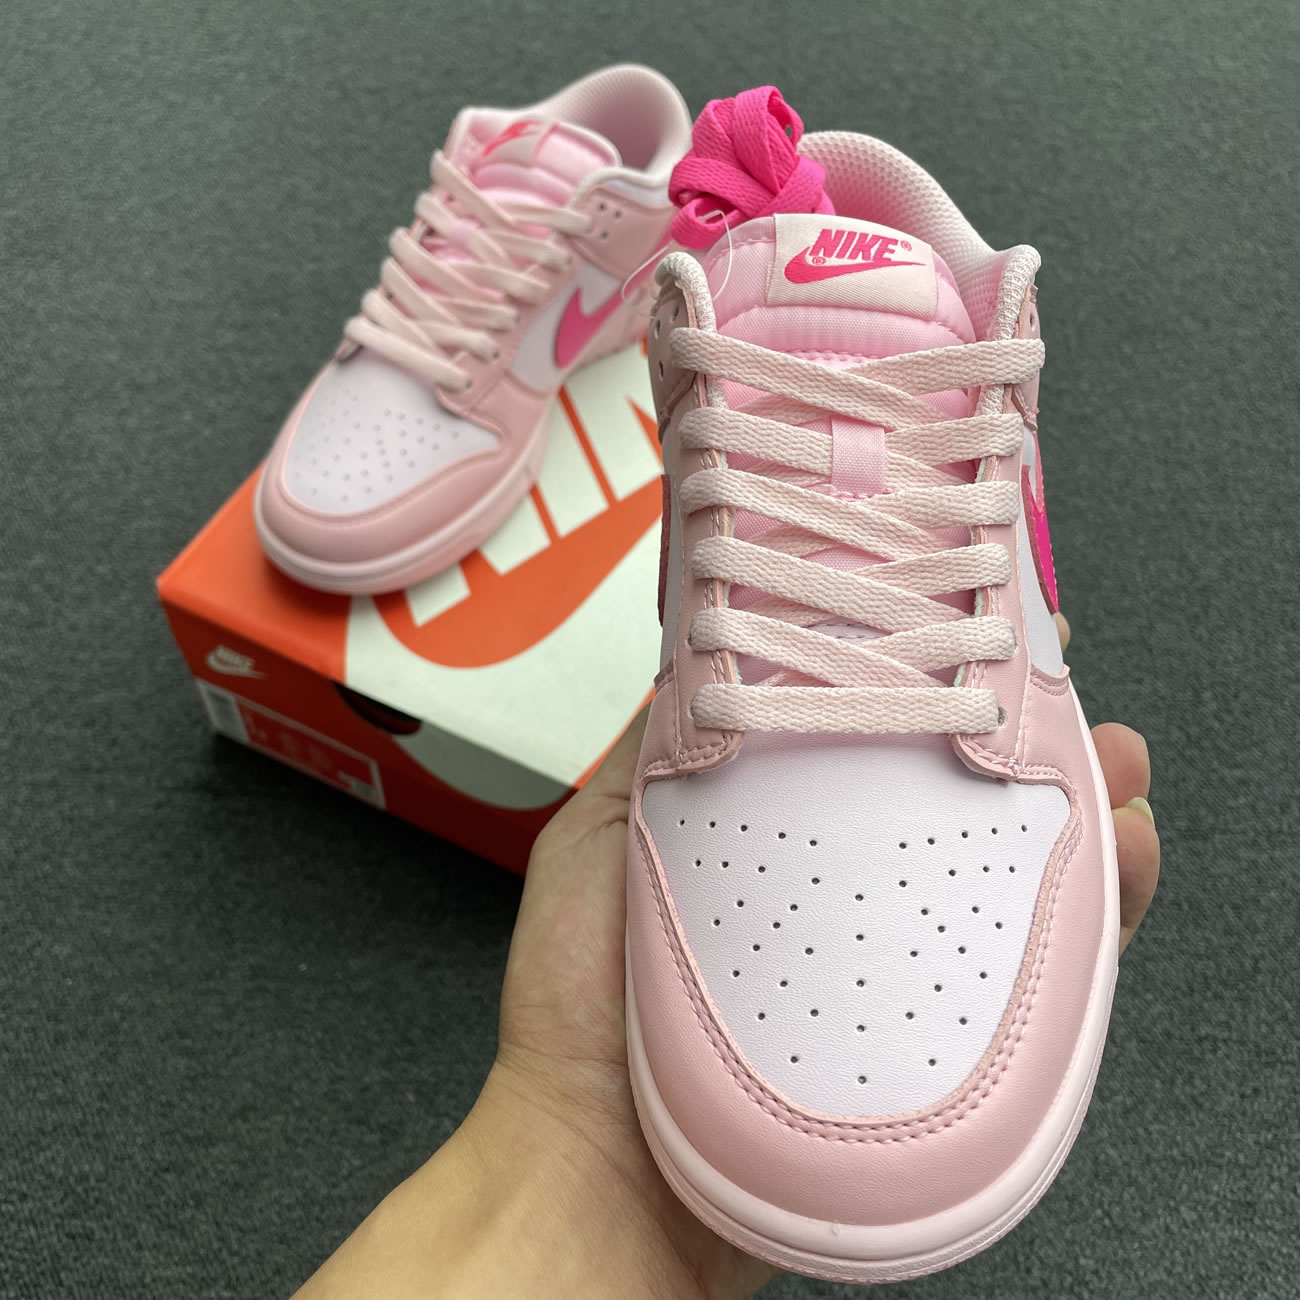 Nike Dunk Low Triple Pink Gs Dh9765 600 (4) - newkick.org